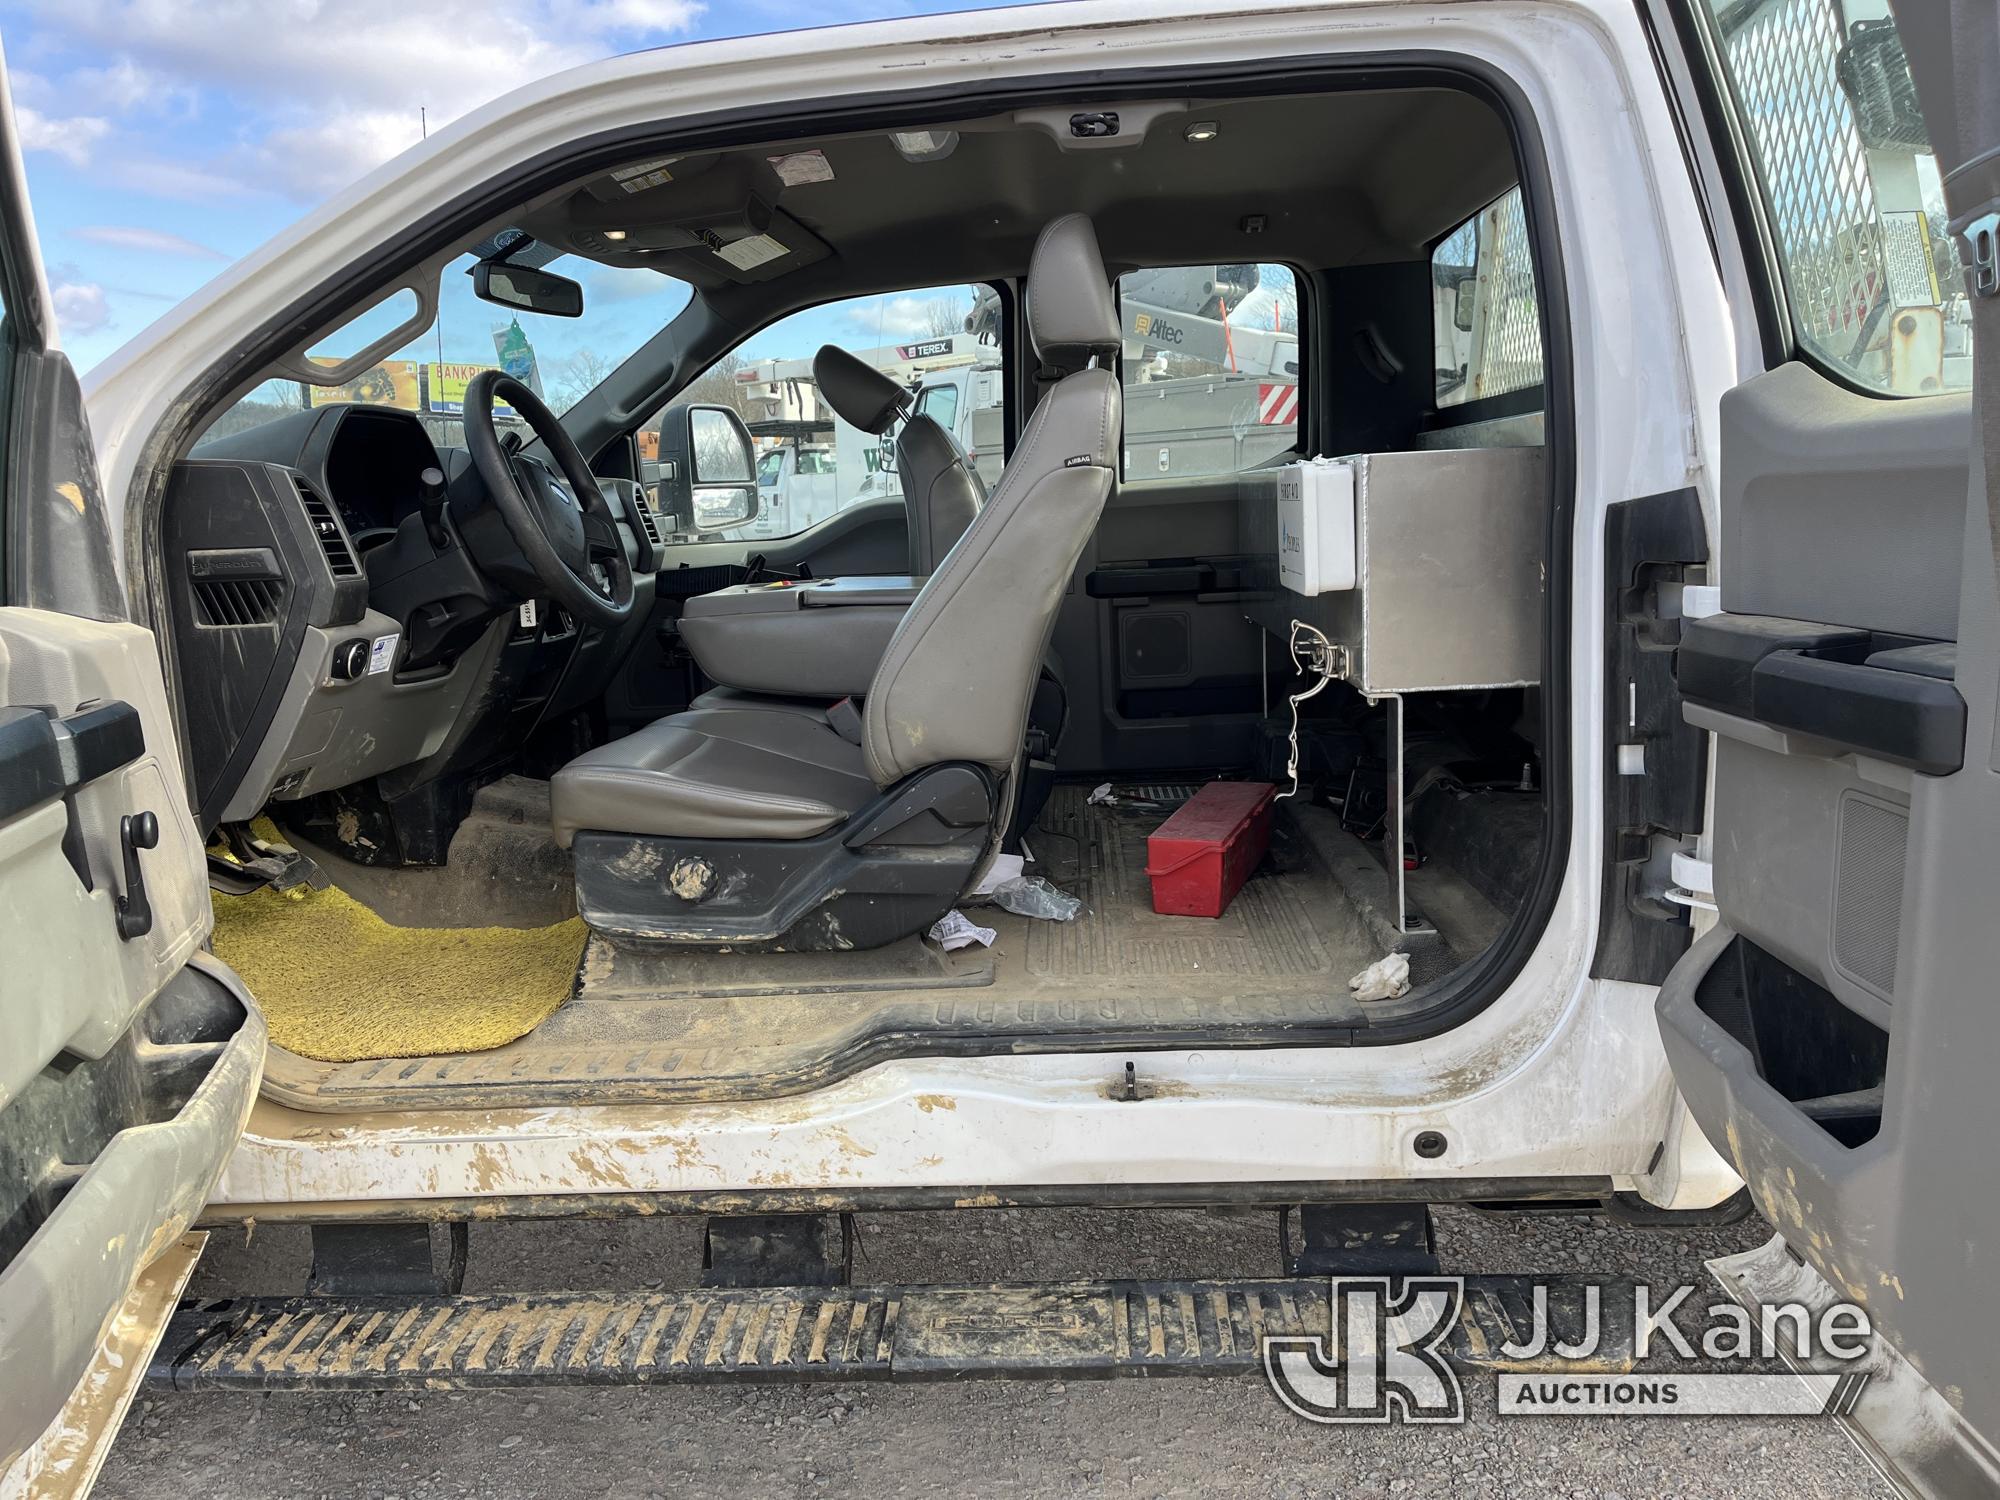 (Smock, PA) 2017 Ford F250 4x4 Extended-Cab Pickup Truck Runs & Moves, Side Mirror Housing Broken &